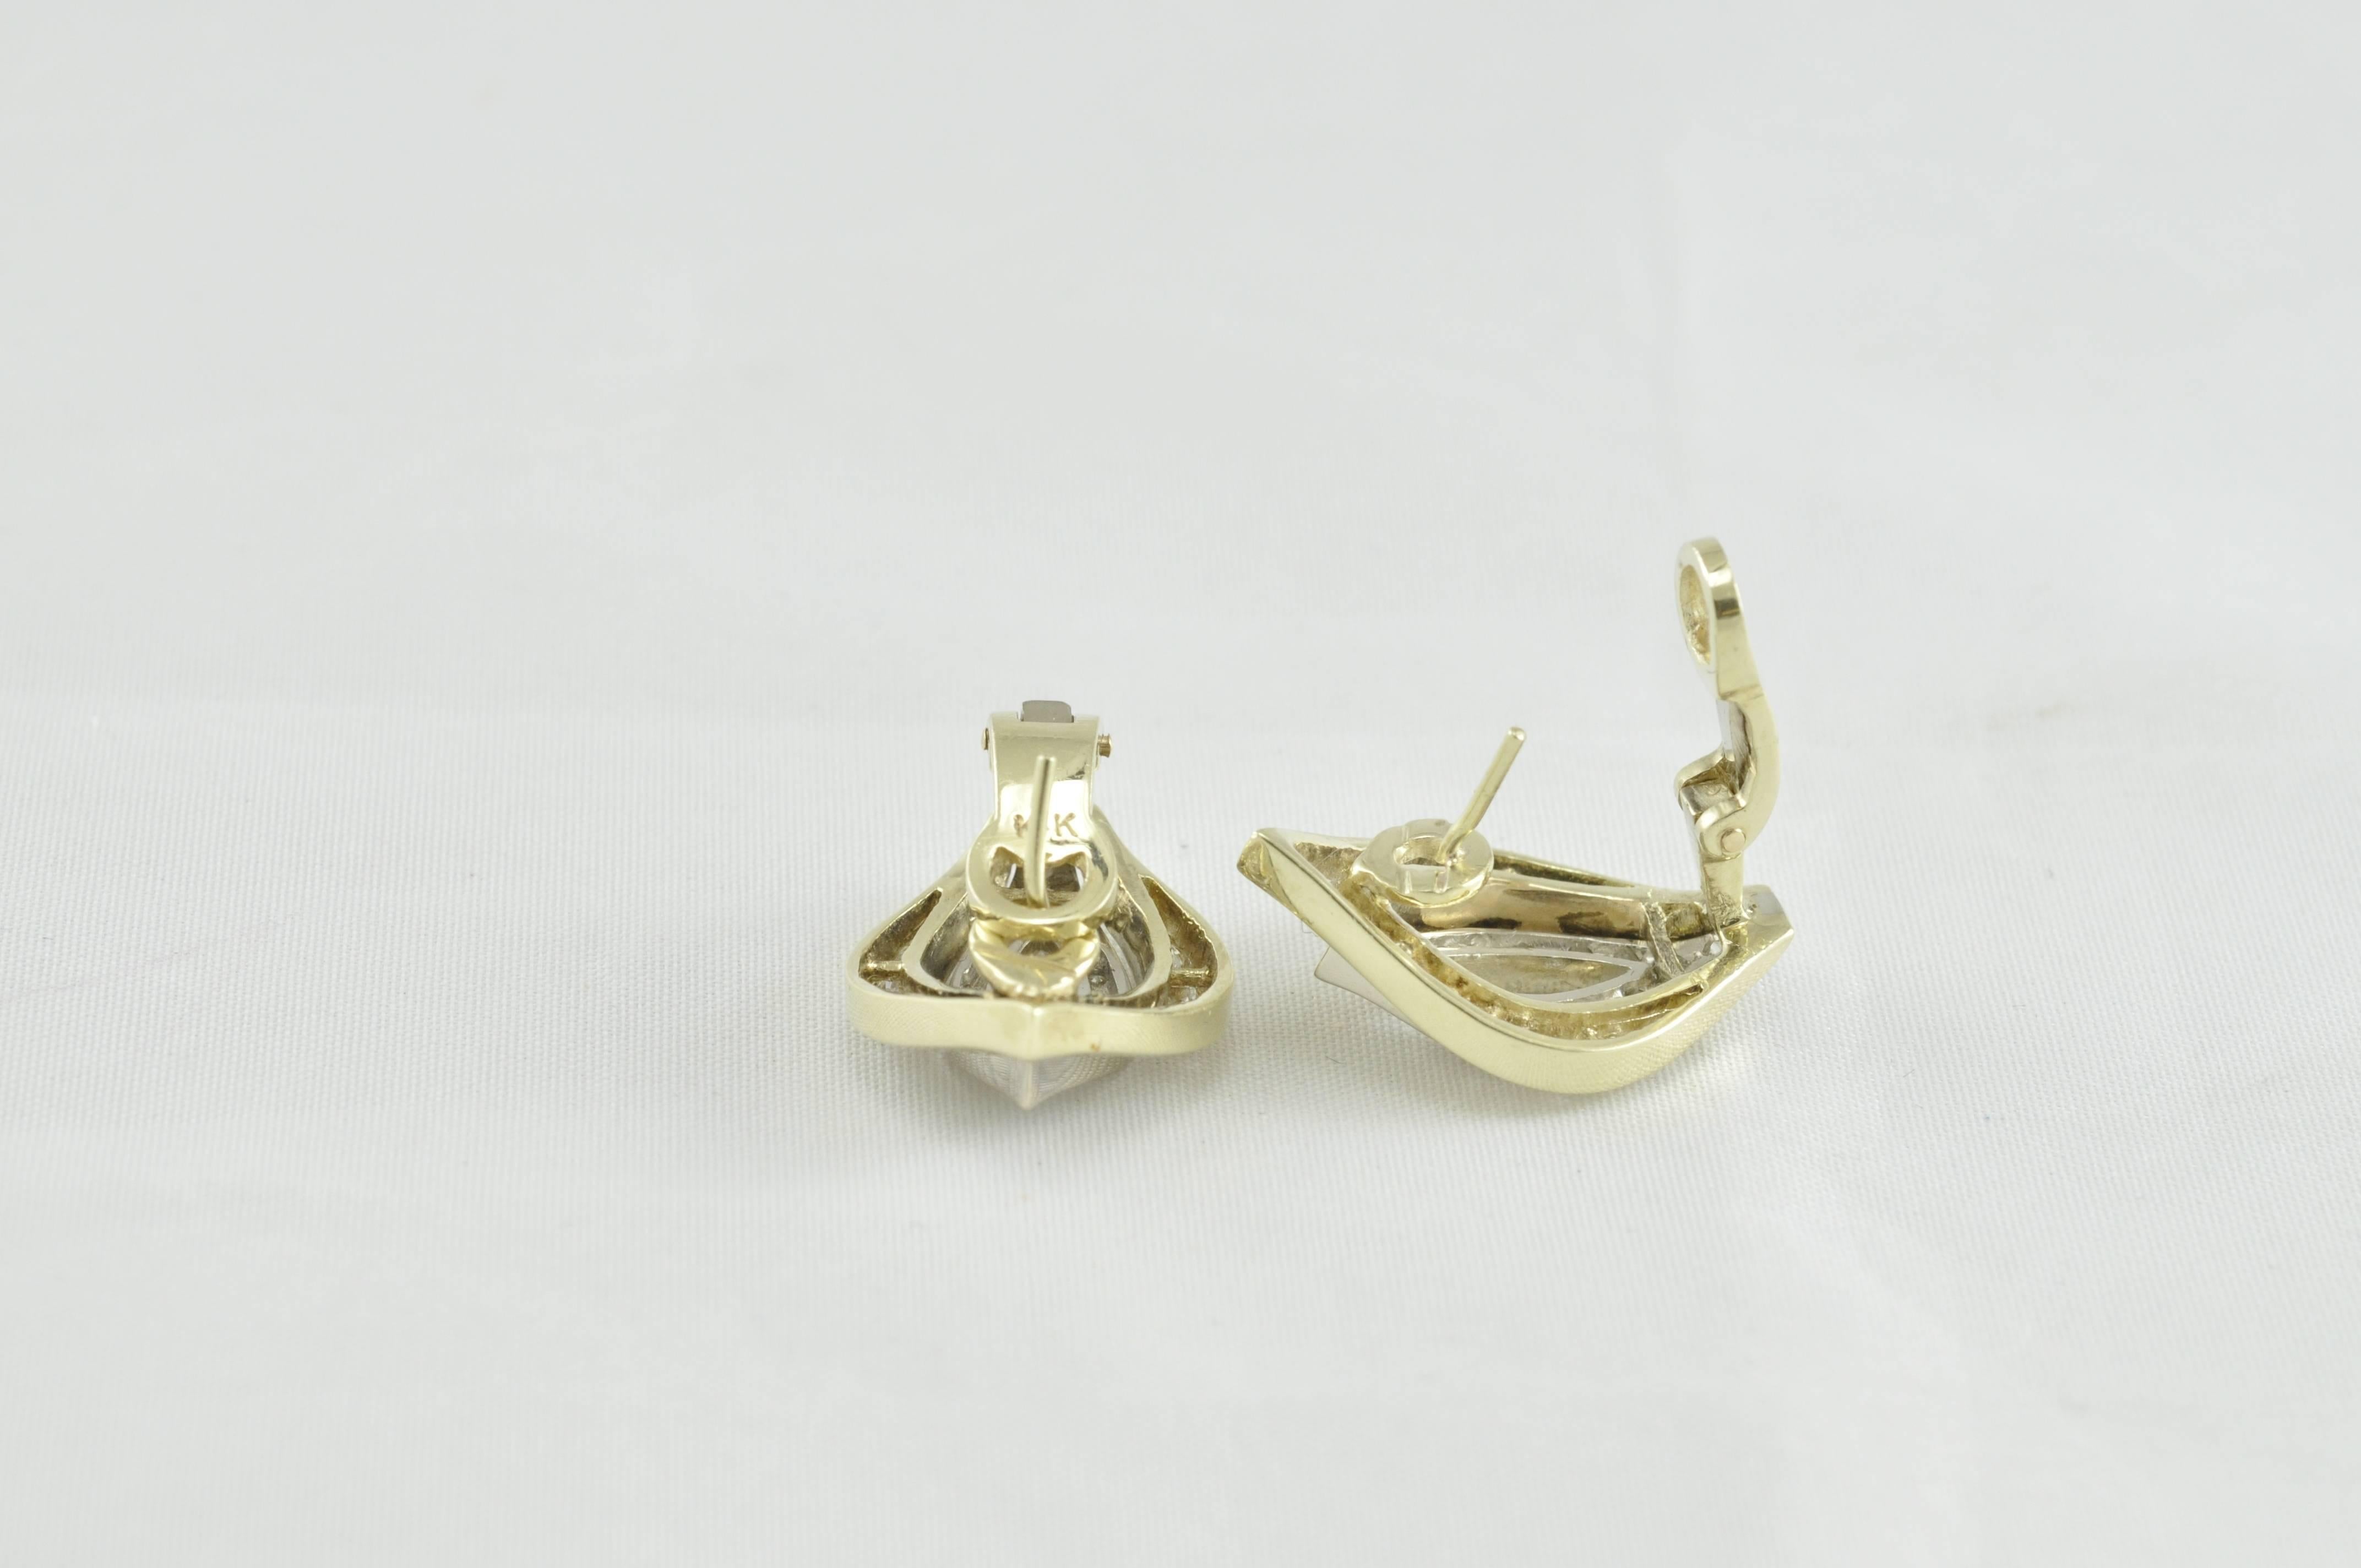 14K Combination of White and Yellow Gold Chevron Earrings.  Post Clip.   Made for pierced ears.  These earrings come with 1.50CTW Round Diamonds.  Stamped 14K.  

70 diamonds total.  

Diamonds are of H Color VS/2 Clarity.  